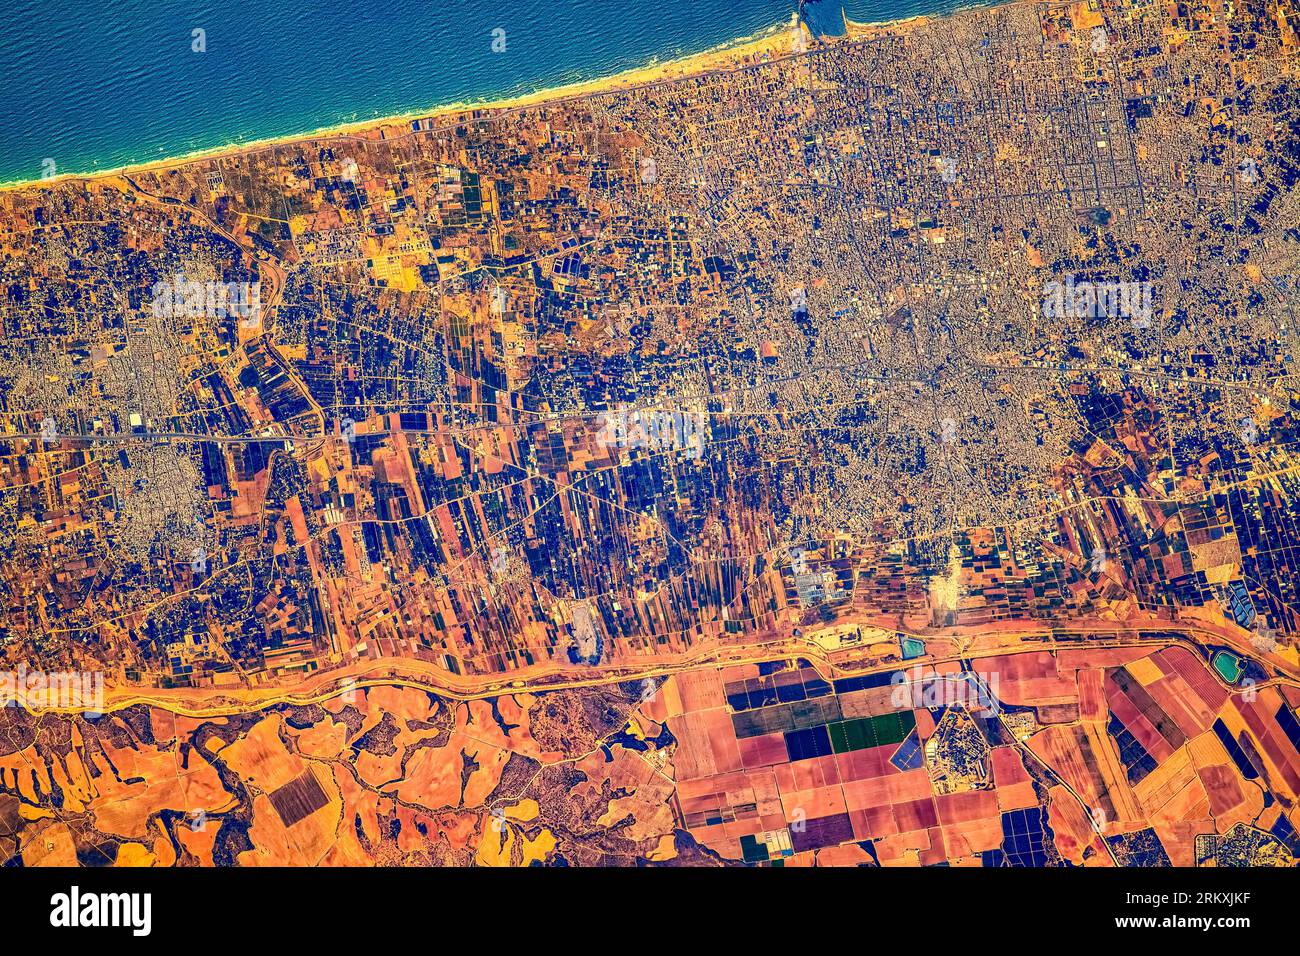 Urban settlement in the Middle East. Egypt or Israel. Possibly the Gaza Strip. Digital enhancement of an image by NASA. Stock Photo